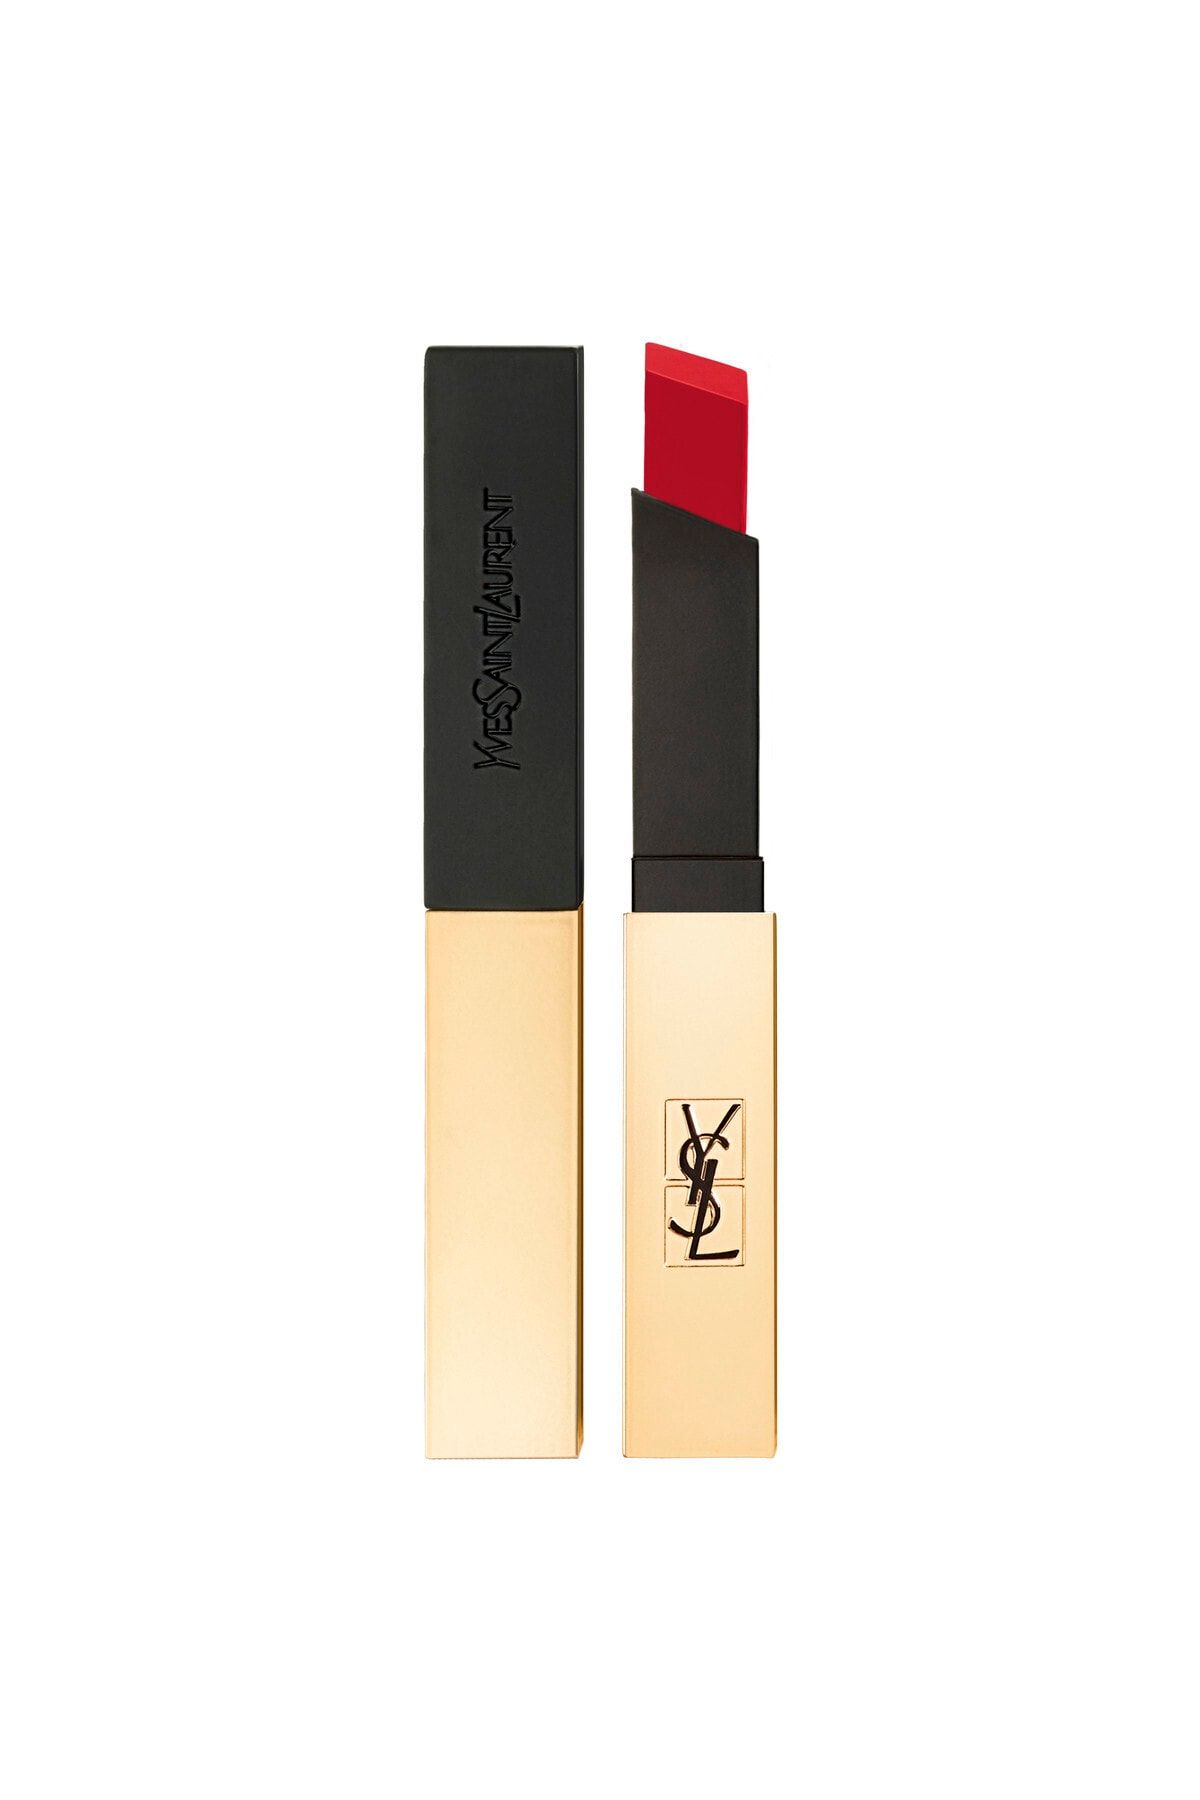 Yves Saint Laurent Rouge Pur Couture The Slim Ruj 1 - Rouge Extravagant 3614272139909